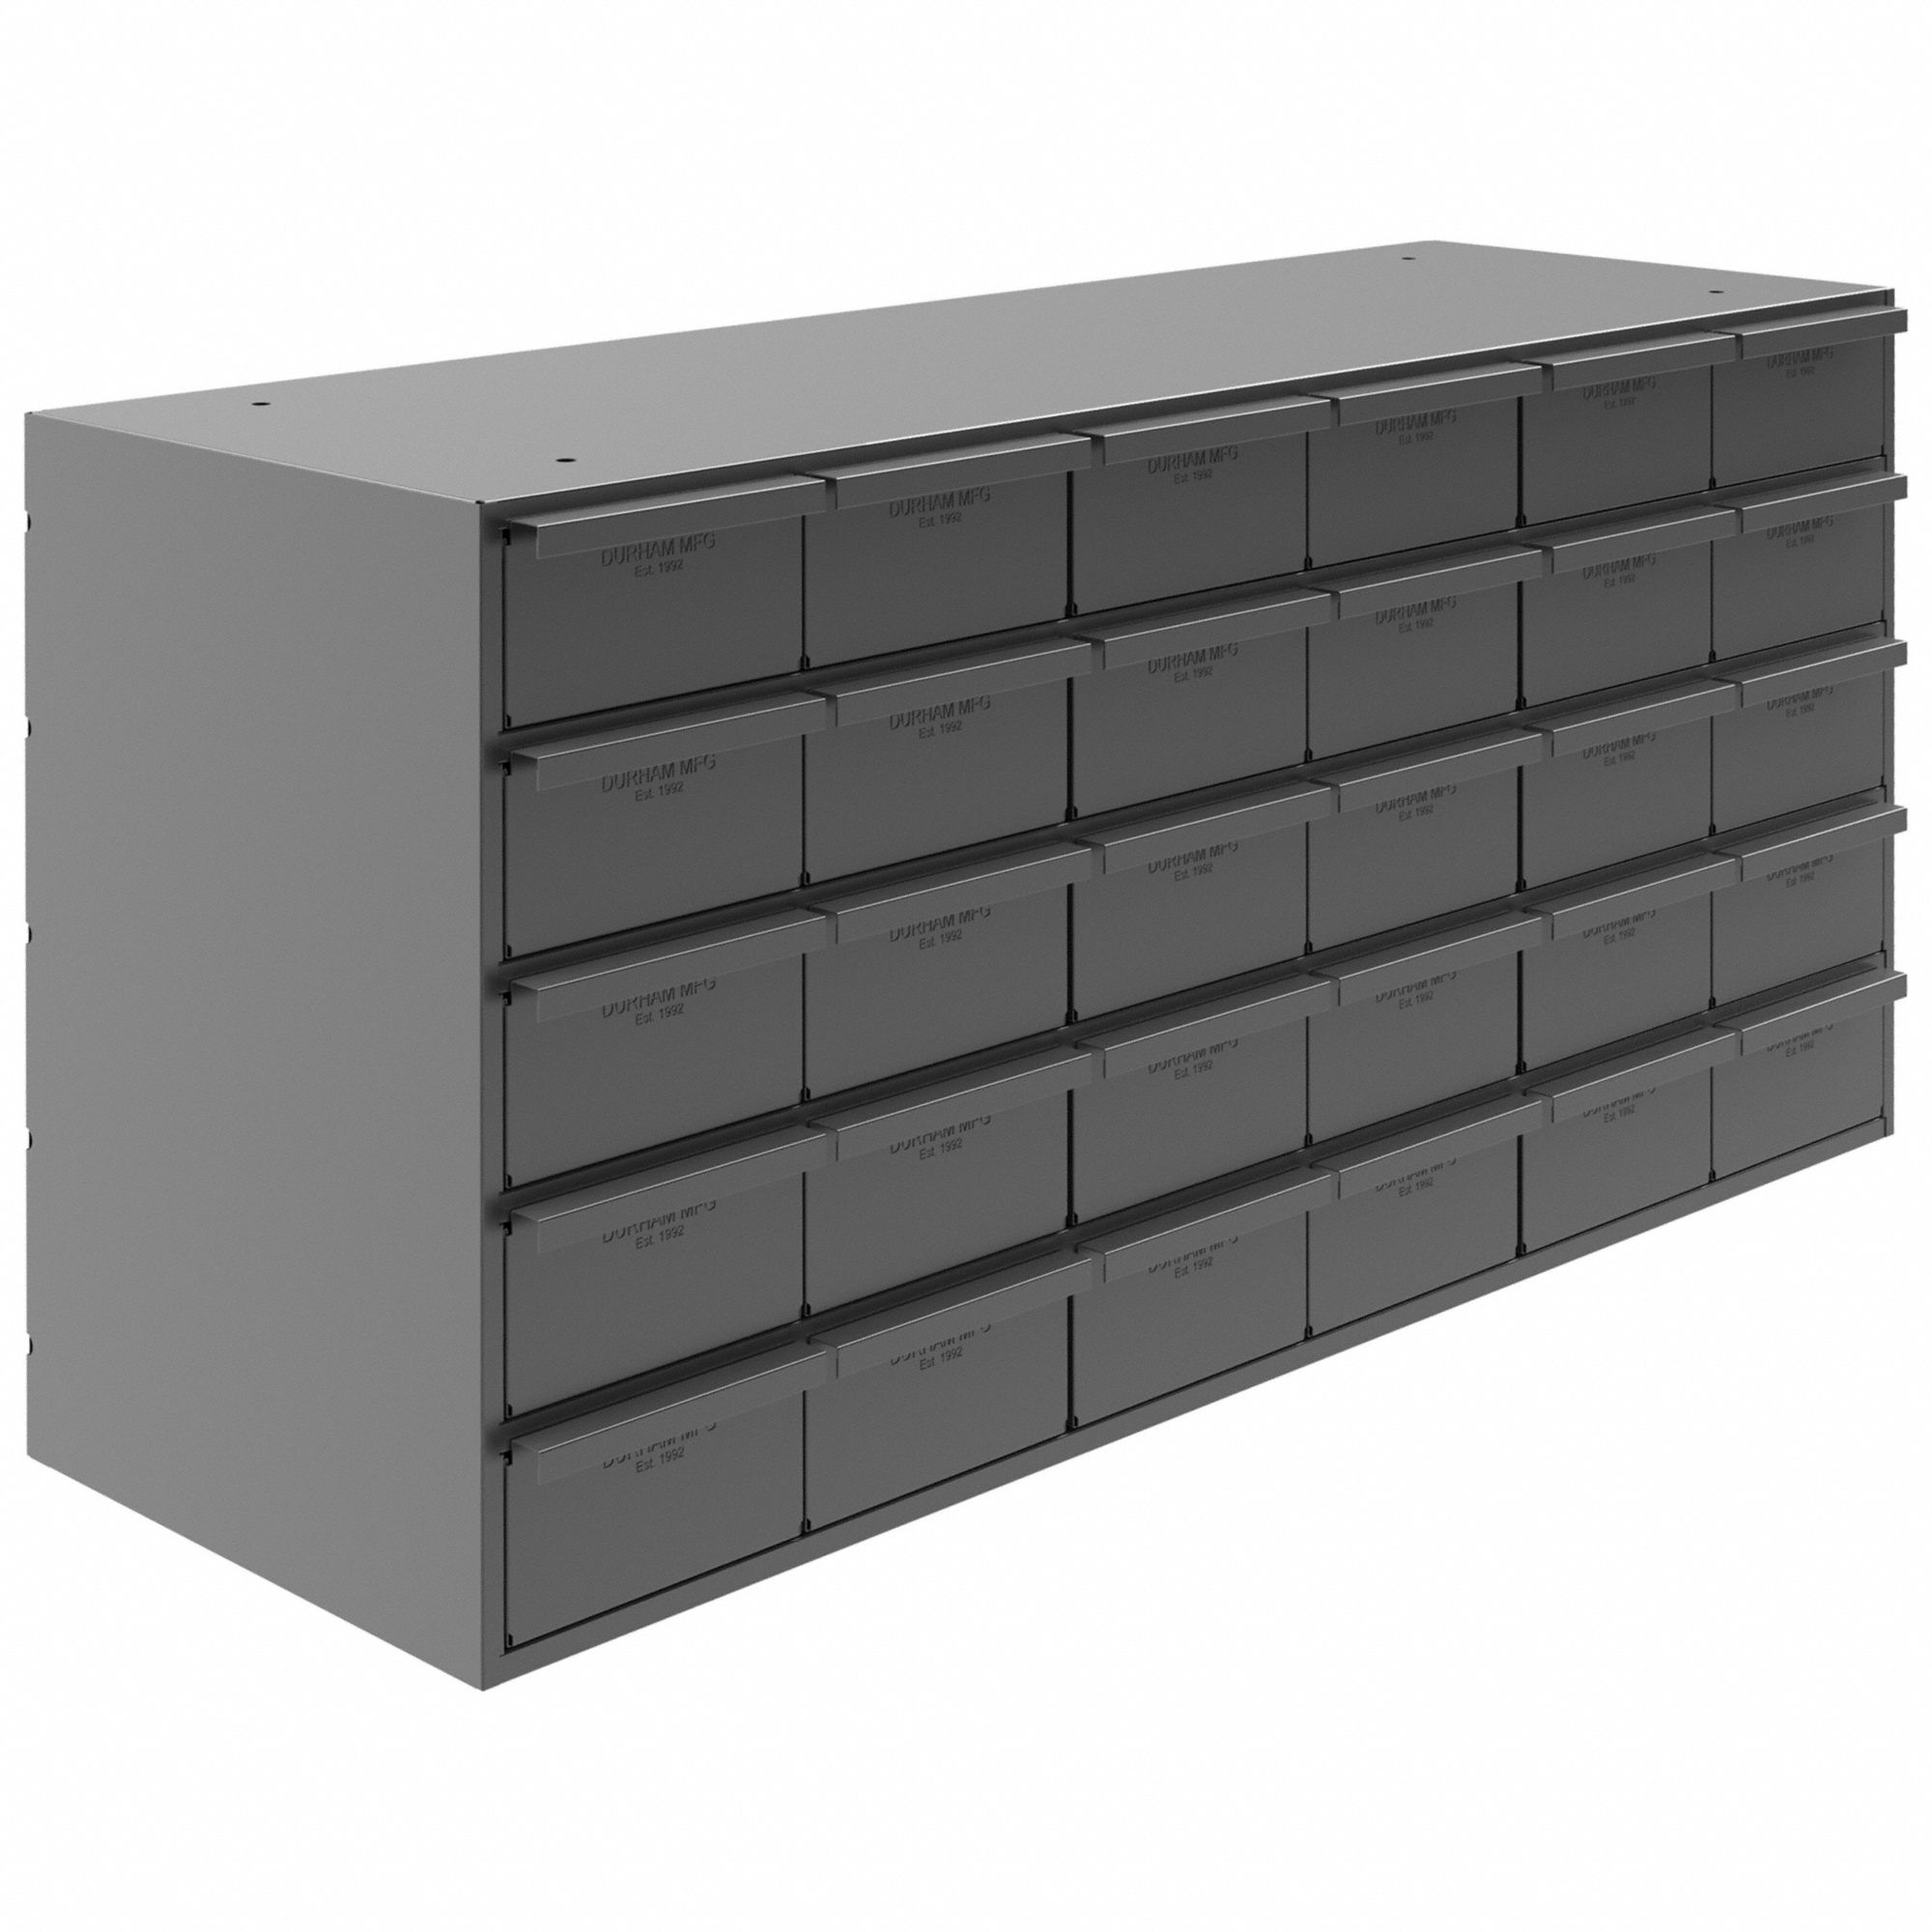 DURHAM MFG Drawer Bin Cabinet: 33 3/4 in x 12 1/4 in x 17 3/4 in, 30  Drawers, Stackable, Steel, Gray